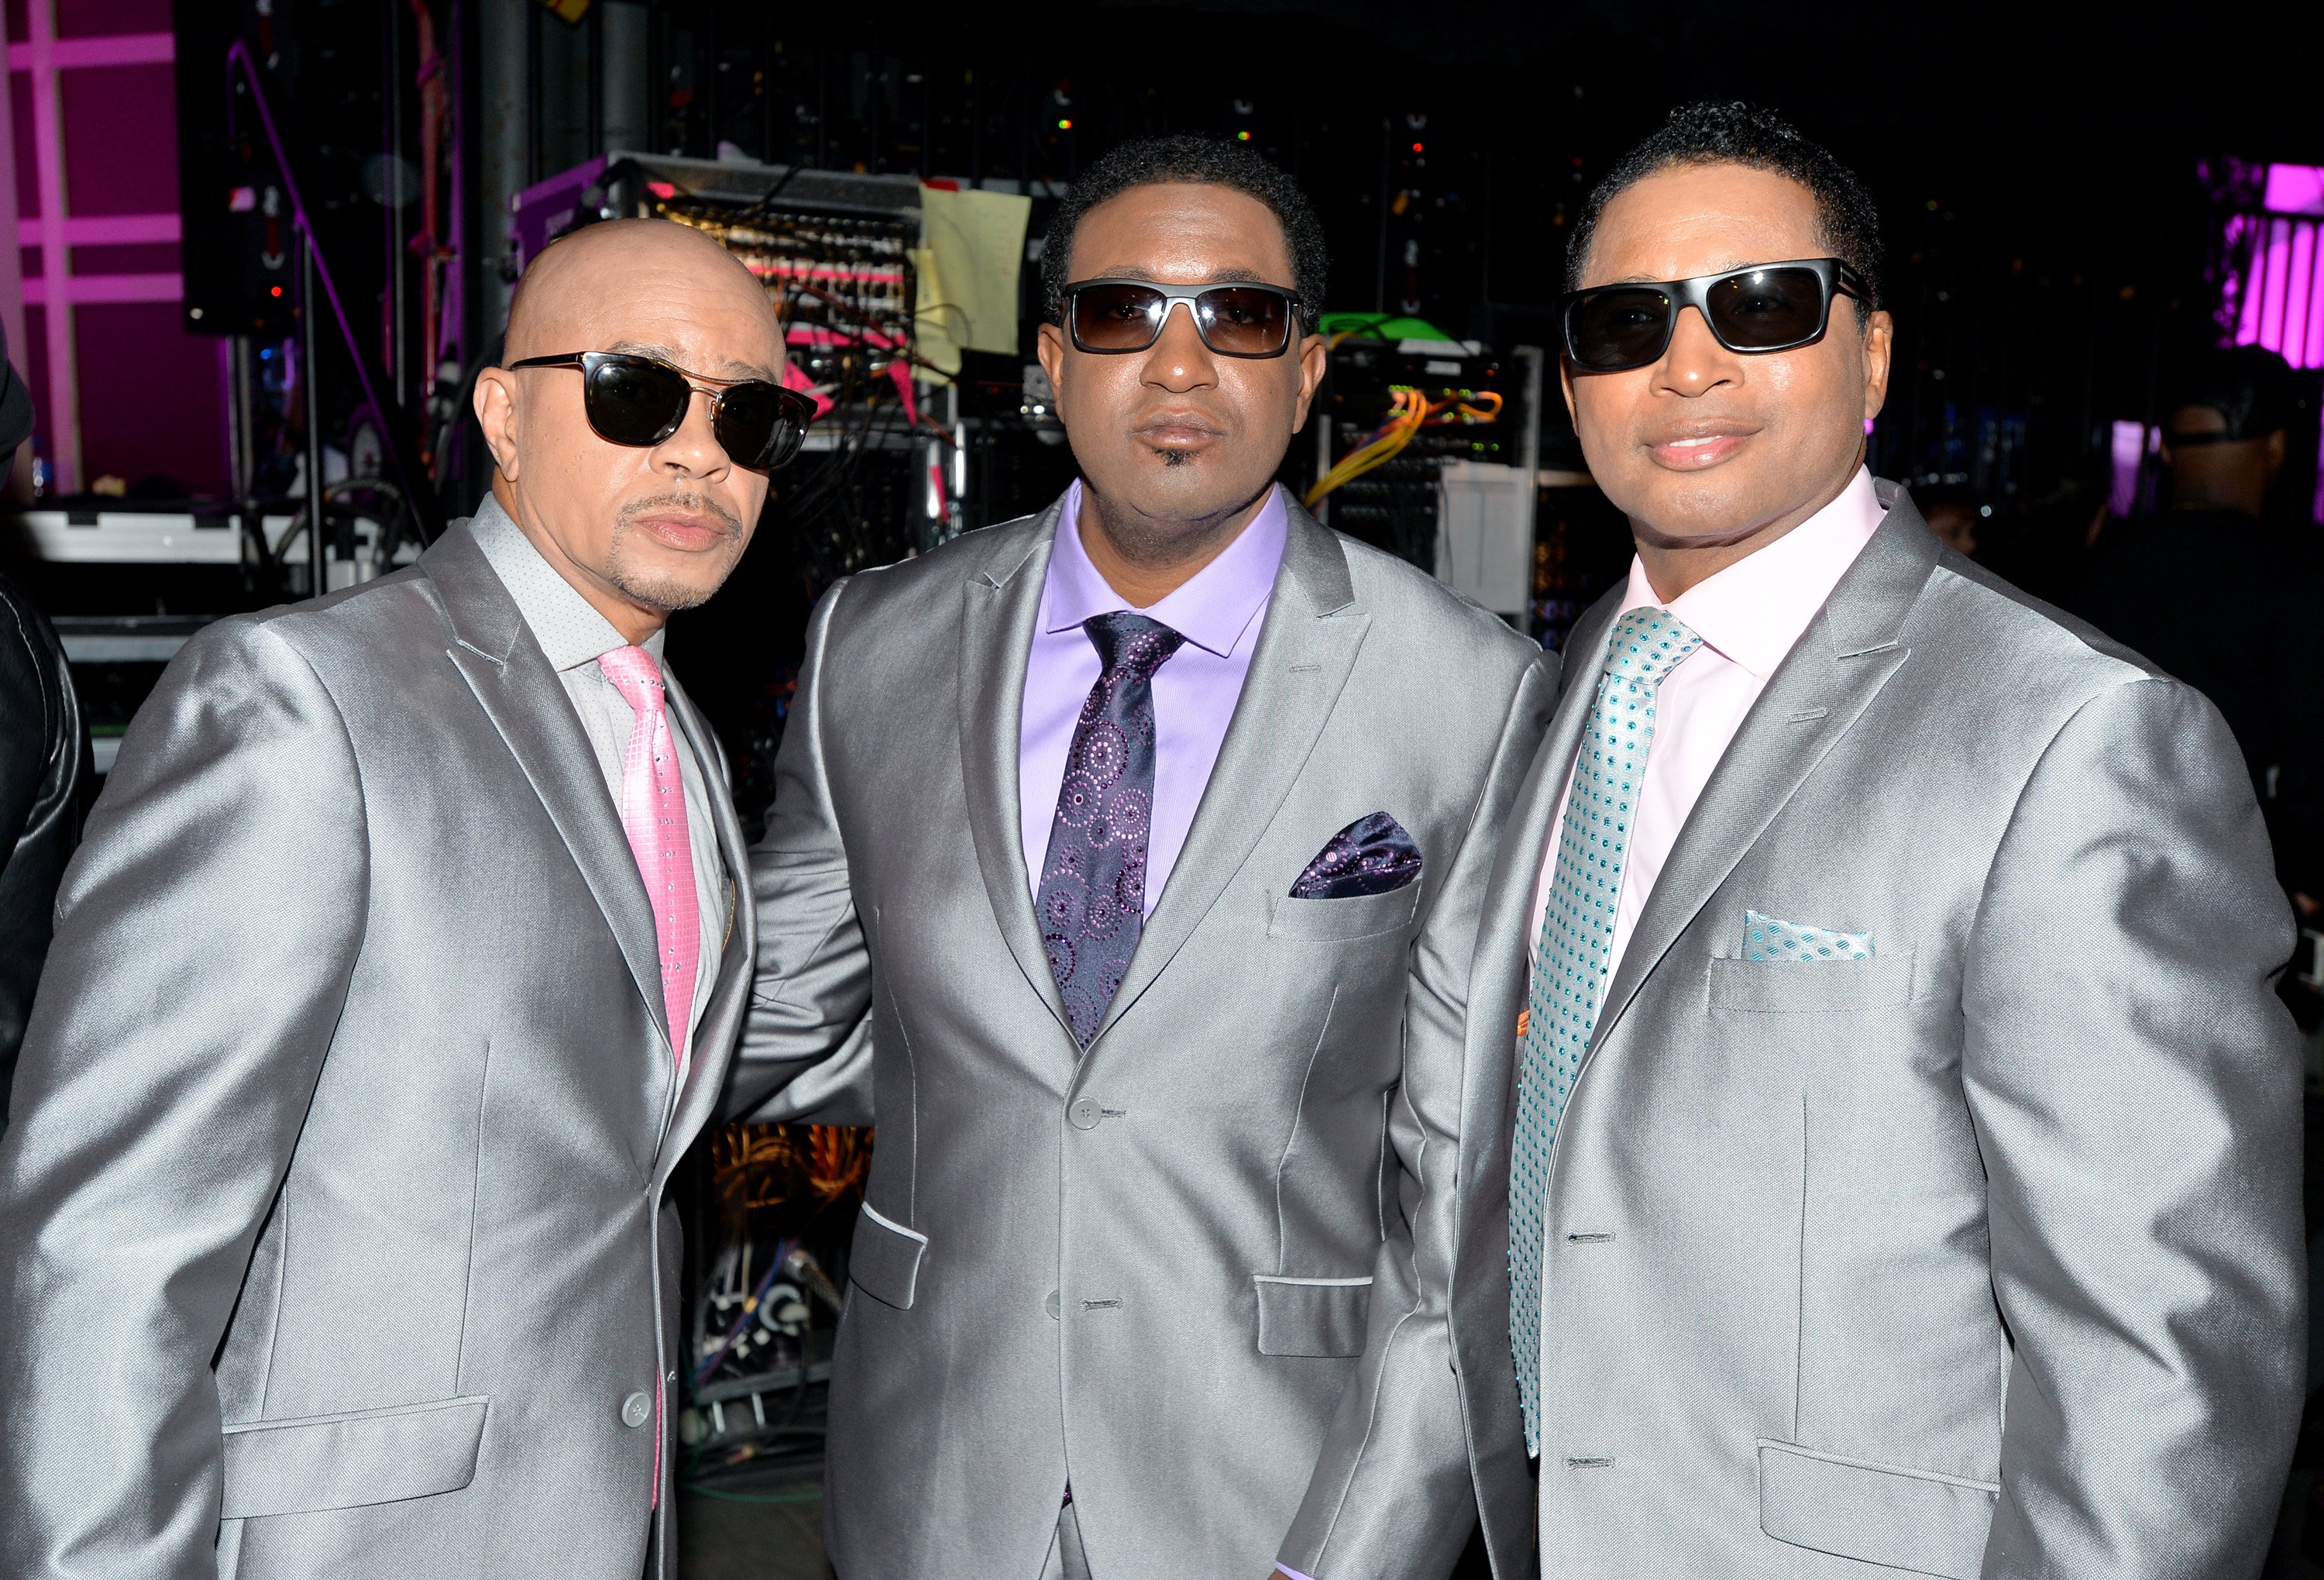 (L-R) Keith Mitchell, Kevon Edmonds and the now-late Melvin Edmonds of “After 7” at the 2015 Soul Train Music Awards in Las Vegas, Nevada on Nov. 6, 2015. | Photo: Getty Images